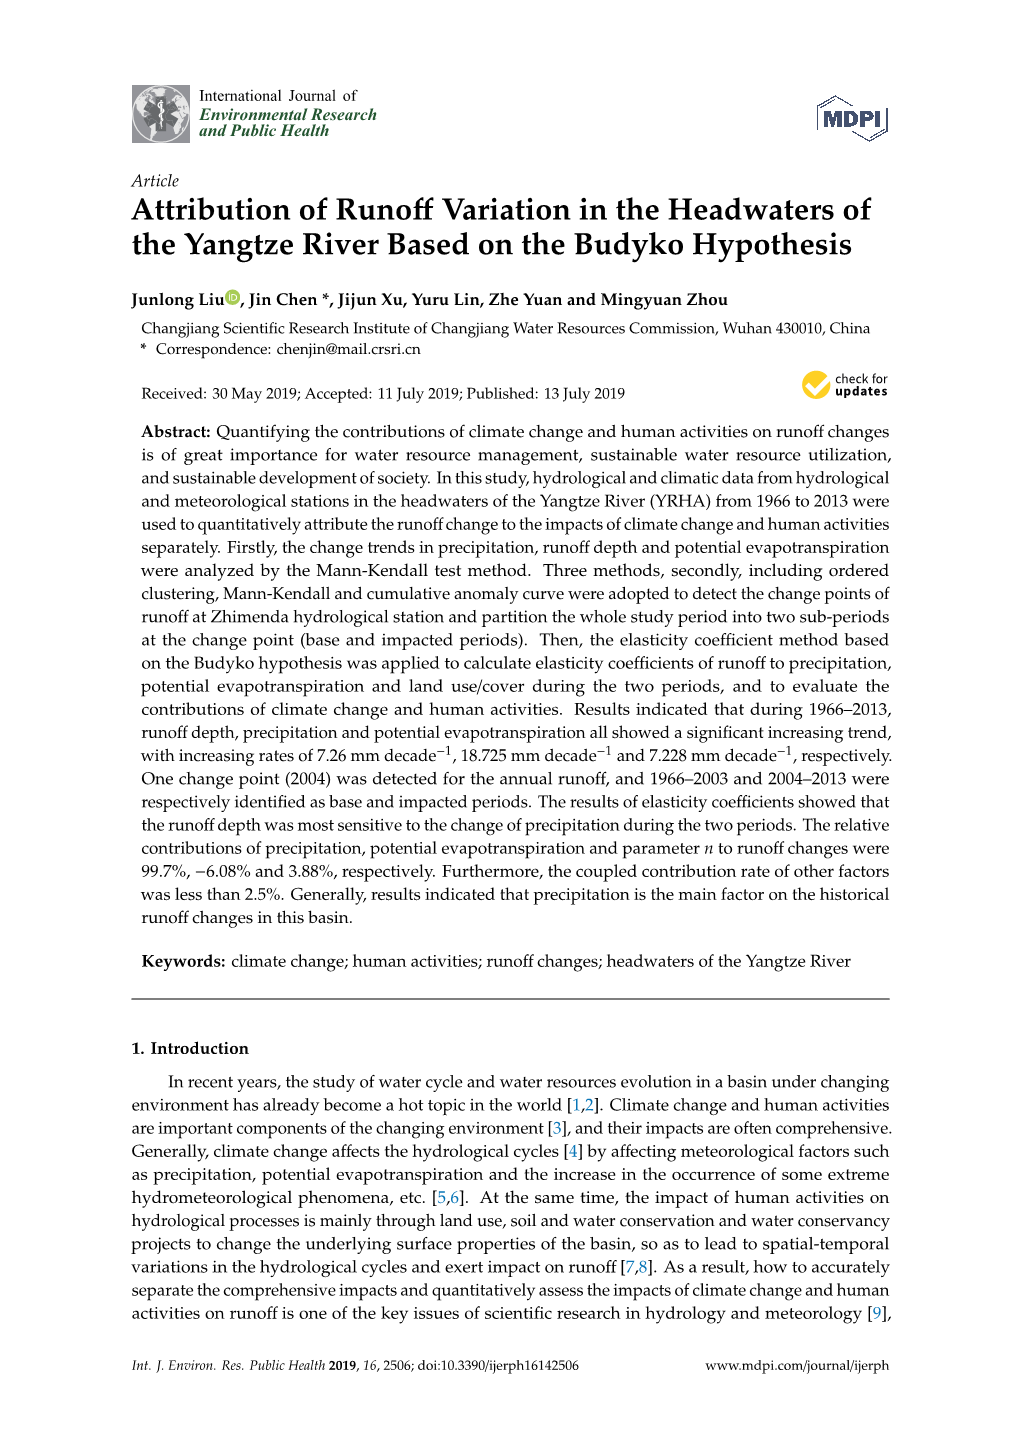 Attribution of Runoff Variation in the Headwaters of the Yangtze River